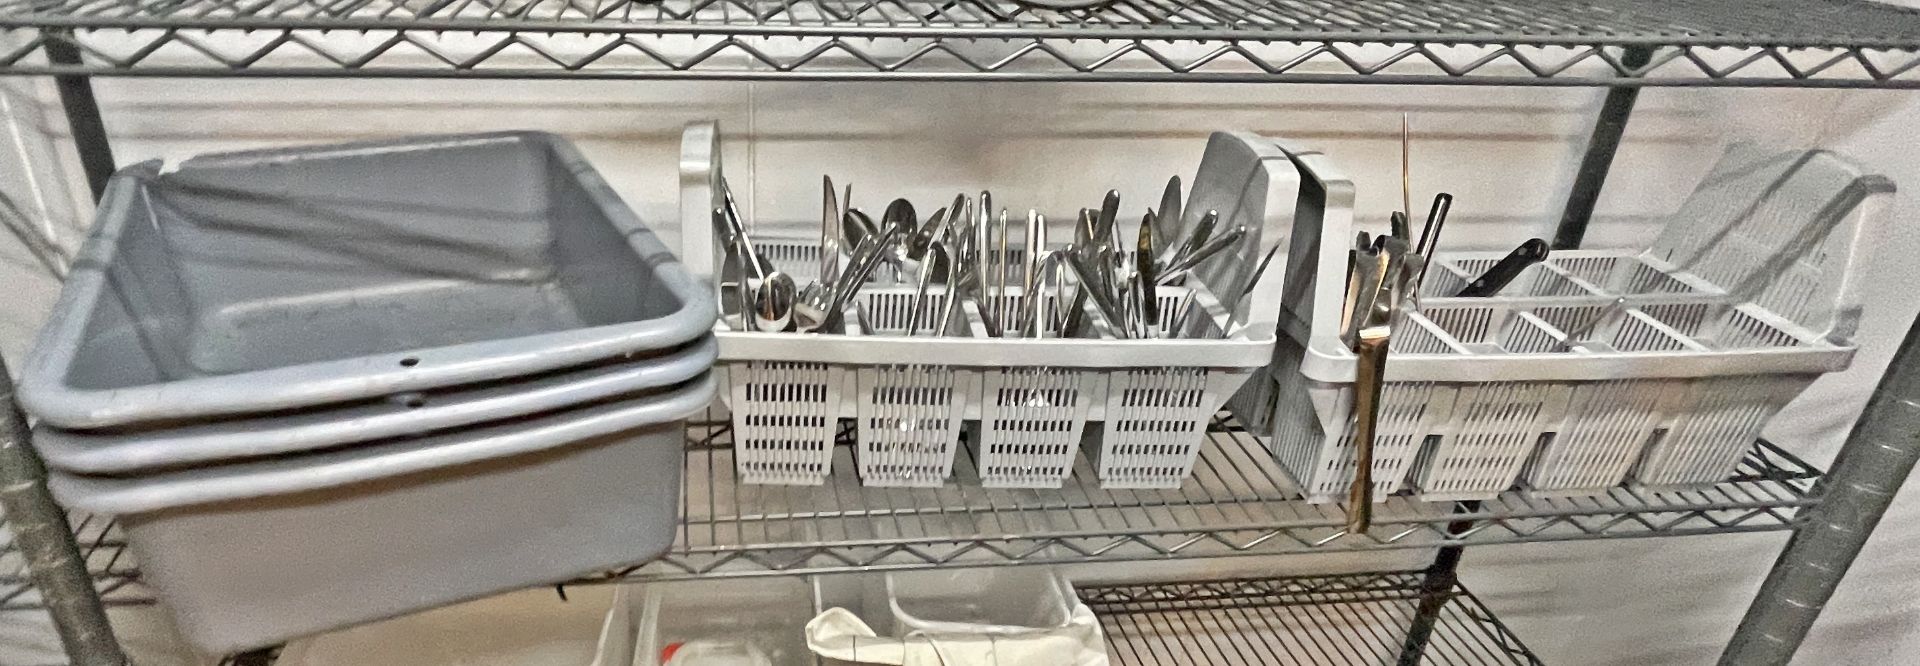 2 x Dishwasher Cutlery Rack Baskets with a Collection of Cutley and Three Wash Bowls - Image 2 of 4